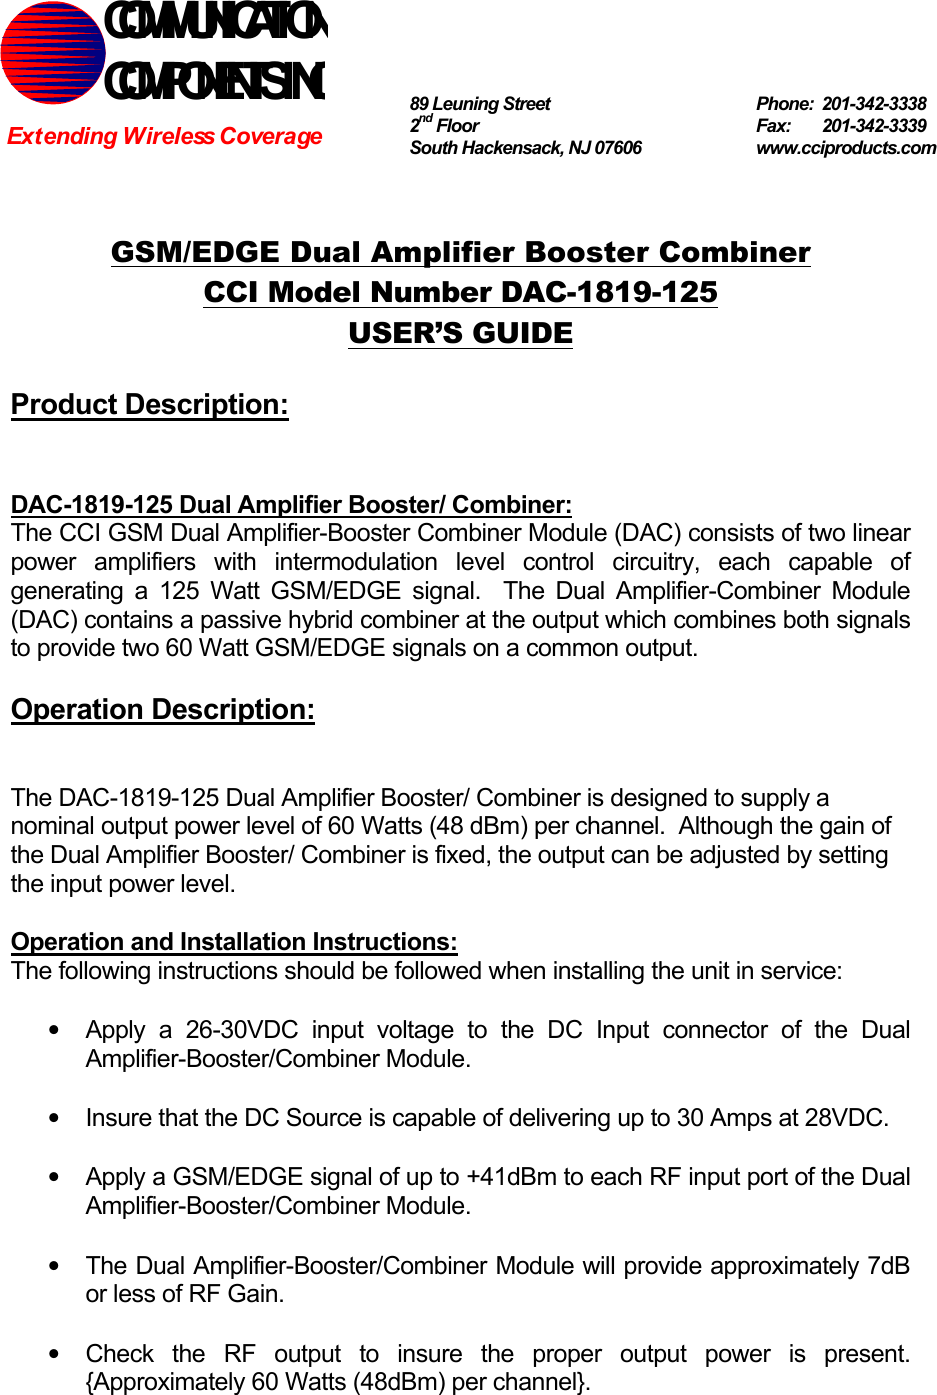   GSM/EDGE Dual Amplifier Booster Combiner CCI Model Number DAC-1819-125 USER’S GUIDE  Product Description:   DAC-1819-125 Dual Amplifier Booster/ Combiner: The CCI GSM Dual Amplifier-Booster Combiner Module (DAC) consists of two linear power amplifiers with intermodulation level control circuitry, each capable of generating a 125 Watt GSM/EDGE signal.  The Dual Amplifier-Combiner Module (DAC) contains a passive hybrid combiner at the output which combines both signals to provide two 60 Watt GSM/EDGE signals on a common output.  Operation Description:   The DAC-1819-125 Dual Amplifier Booster/ Combiner is designed to supply a nominal output power level of 60 Watts (48 dBm) per channel.  Although the gain of the Dual Amplifier Booster/ Combiner is fixed, the output can be adjusted by setting the input power level.    Operation and Installation Instructions: The following instructions should be followed when installing the unit in service:  •  Apply a 26-30VDC input voltage to the DC Input connector of the Dual Amplifier-Booster/Combiner Module.  •  Insure that the DC Source is capable of delivering up to 30 Amps at 28VDC.  •  Apply a GSM/EDGE signal of up to +41dBm to each RF input port of the Dual Amplifier-Booster/Combiner Module.  •  The Dual Amplifier-Booster/Combiner Module will provide approximately 7dB or less of RF Gain.  •  Check the RF output to insure the proper output power is present. {Approximately 60 Watts (48dBm) per channel}. COMMUNICATION COMPONENTS INC Extending Wireless Coverage 89 Leuning Street   Phone: 201-342-3338 2nd Floor  Fax:   201-342-3339 South Hackensack, NJ 07606   www.cciproducts.com 